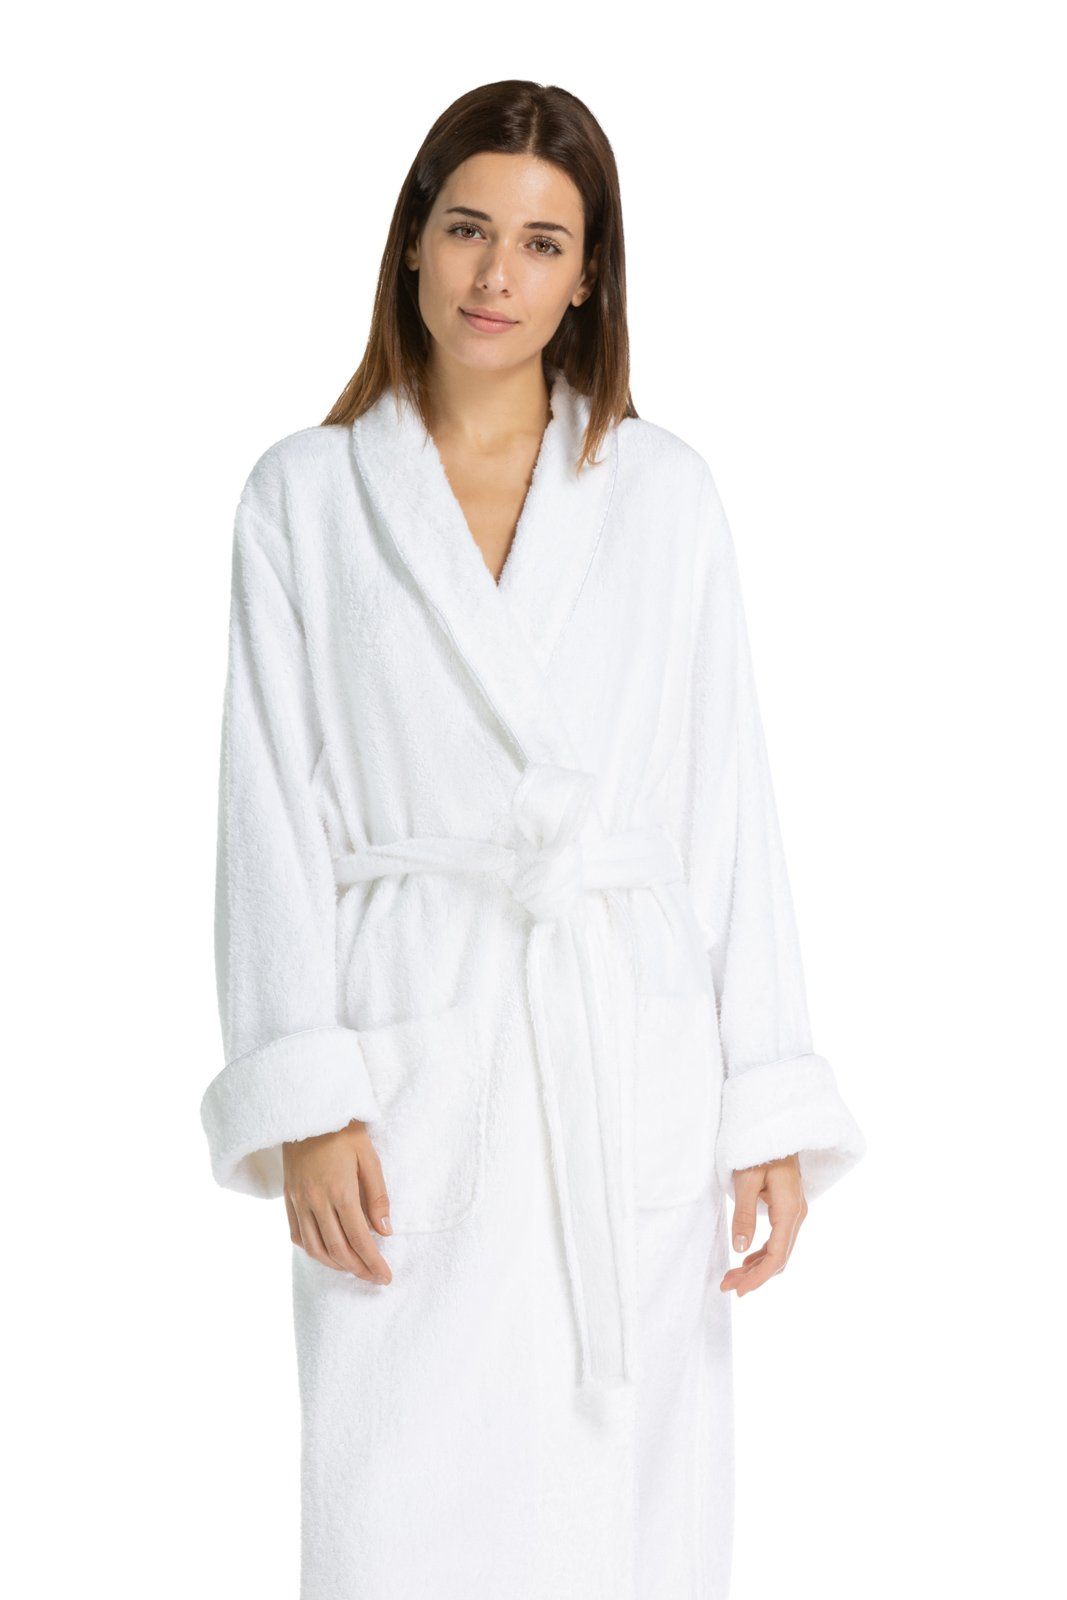 Download Women's Robes | Full Length Terry Cloth Spa Robe | Fishers ...